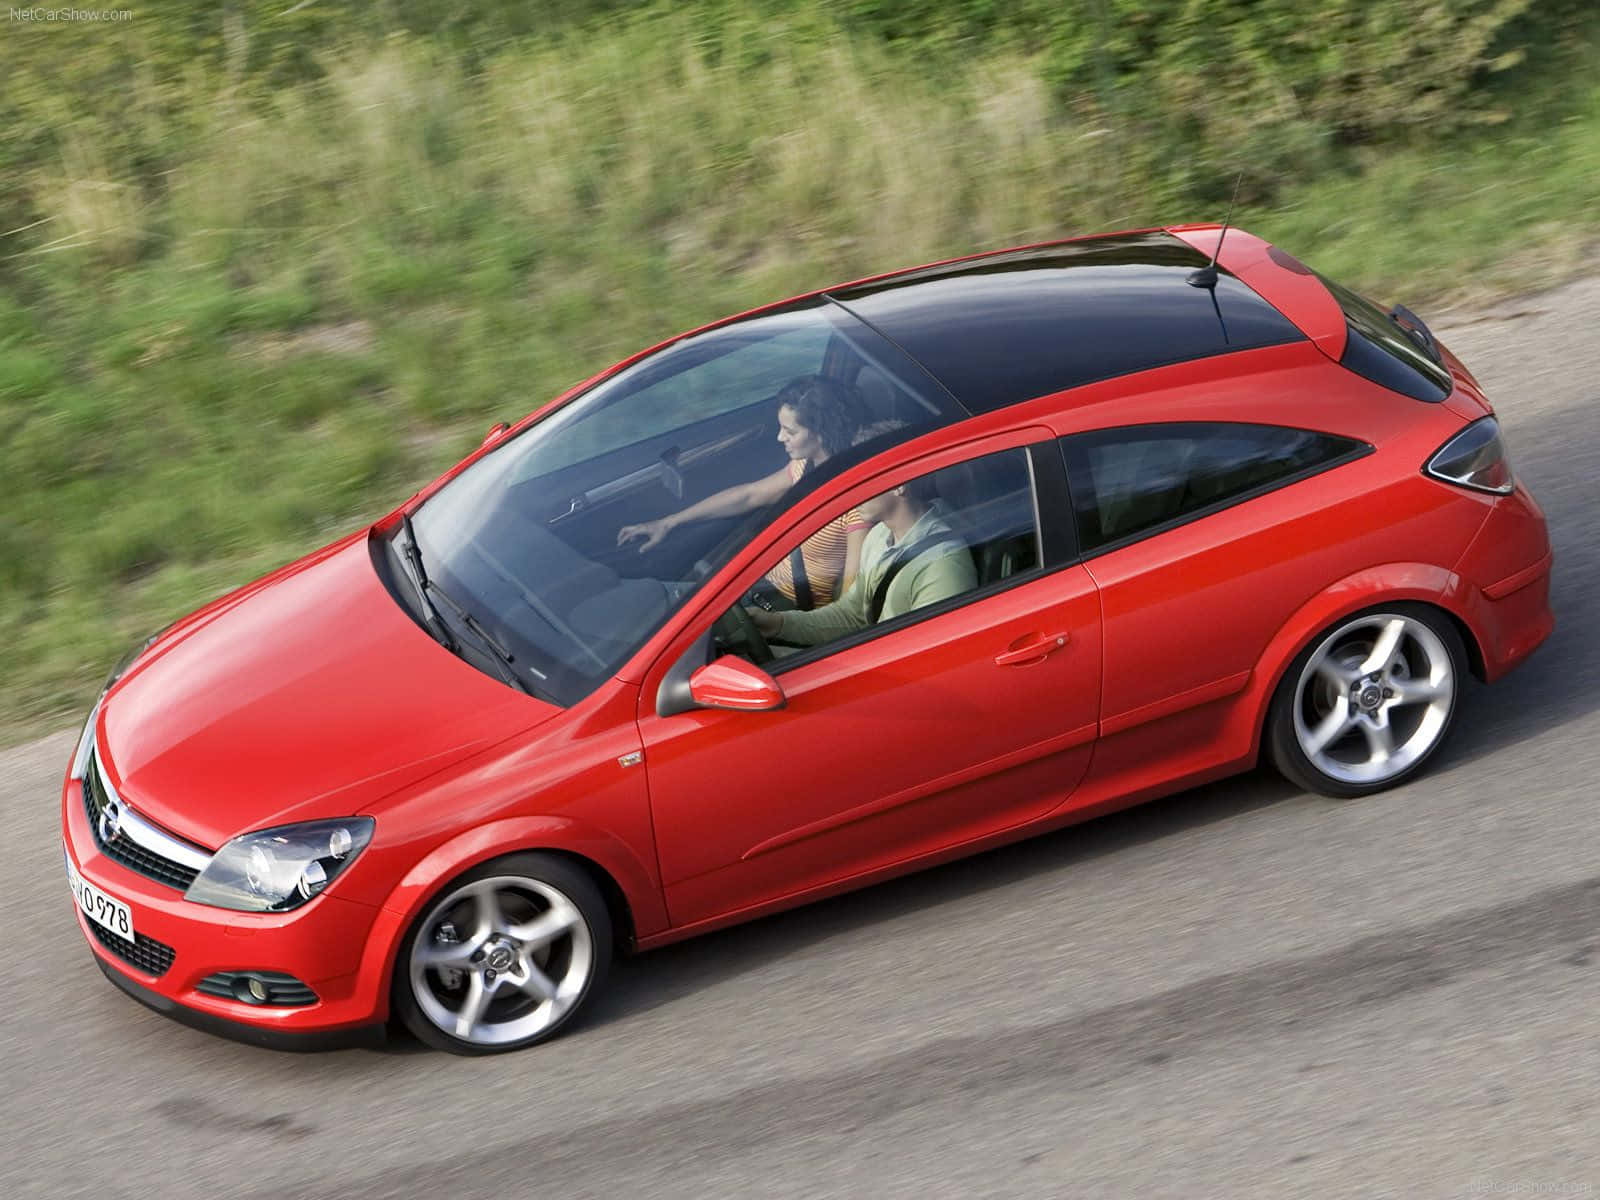 Sleek and Stylish Opel Astra in Motion Wallpaper